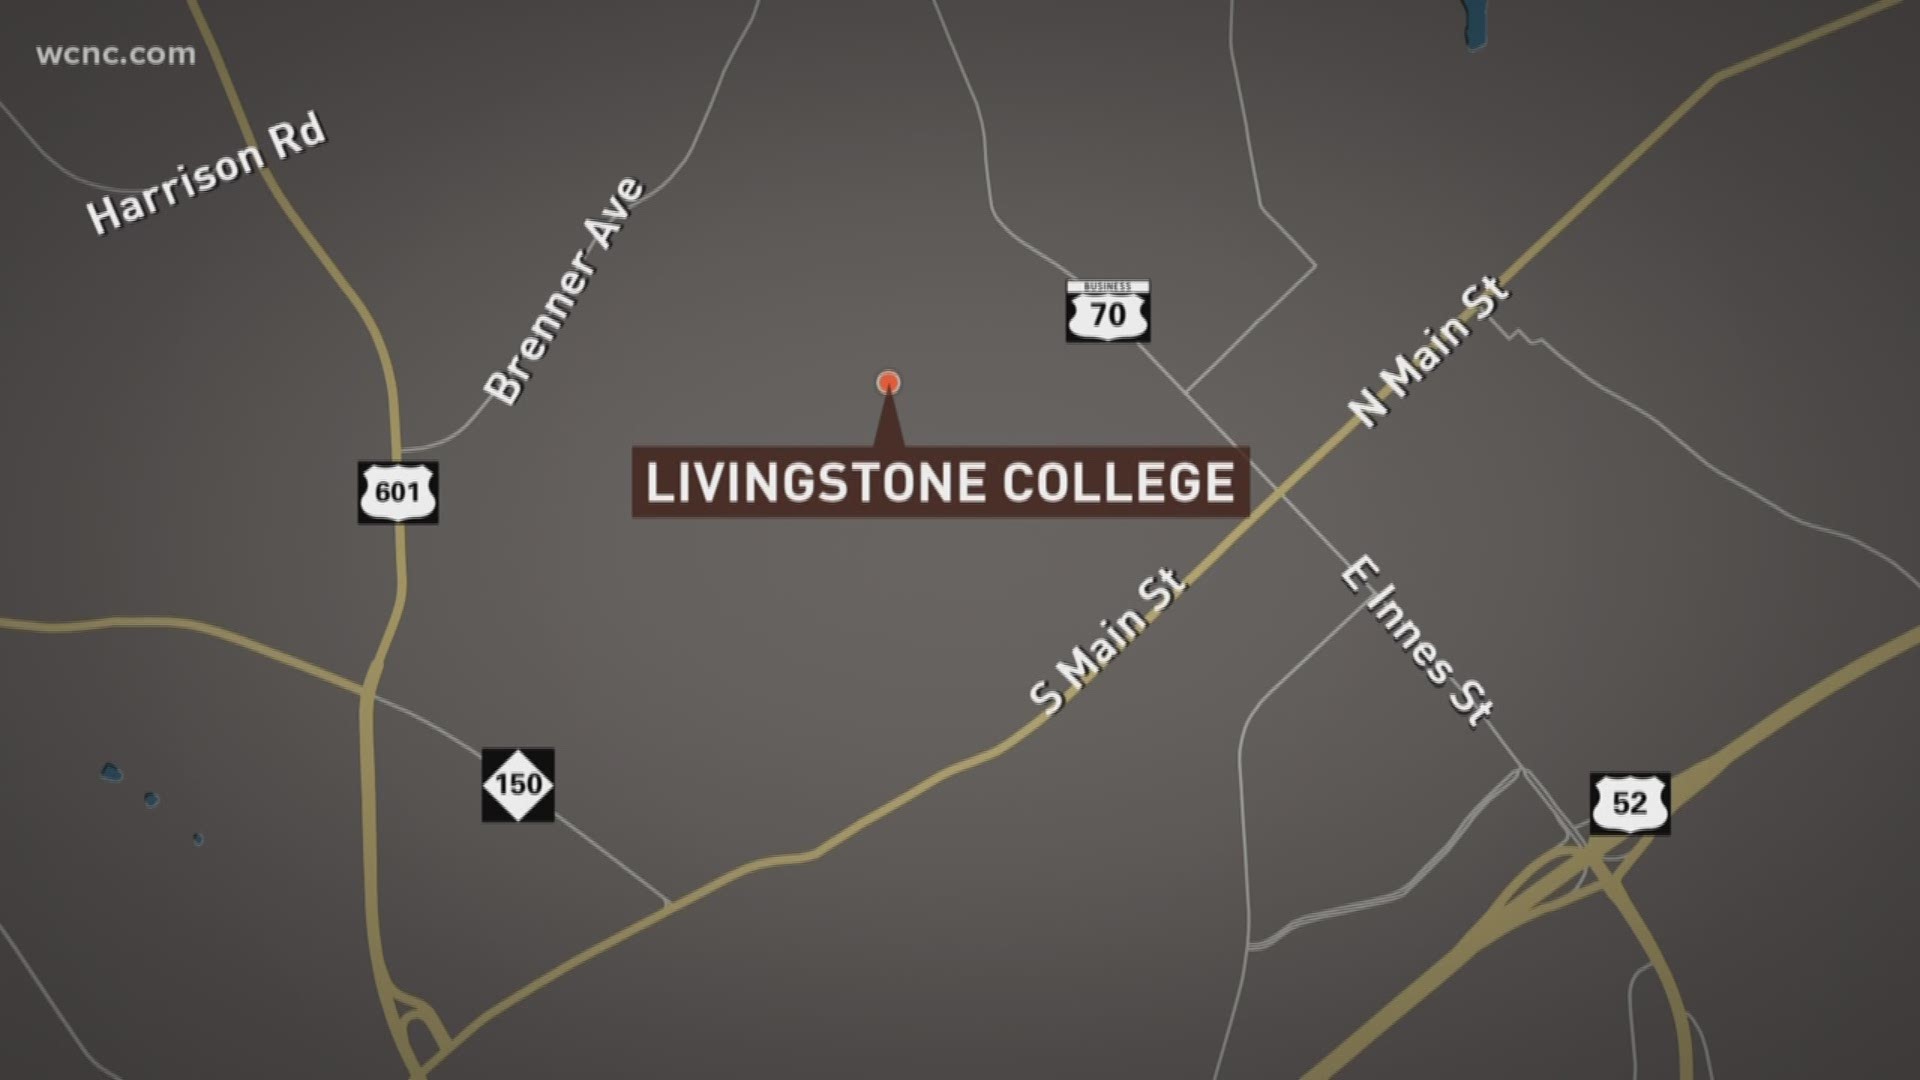 Shots fired call at Livingstone College